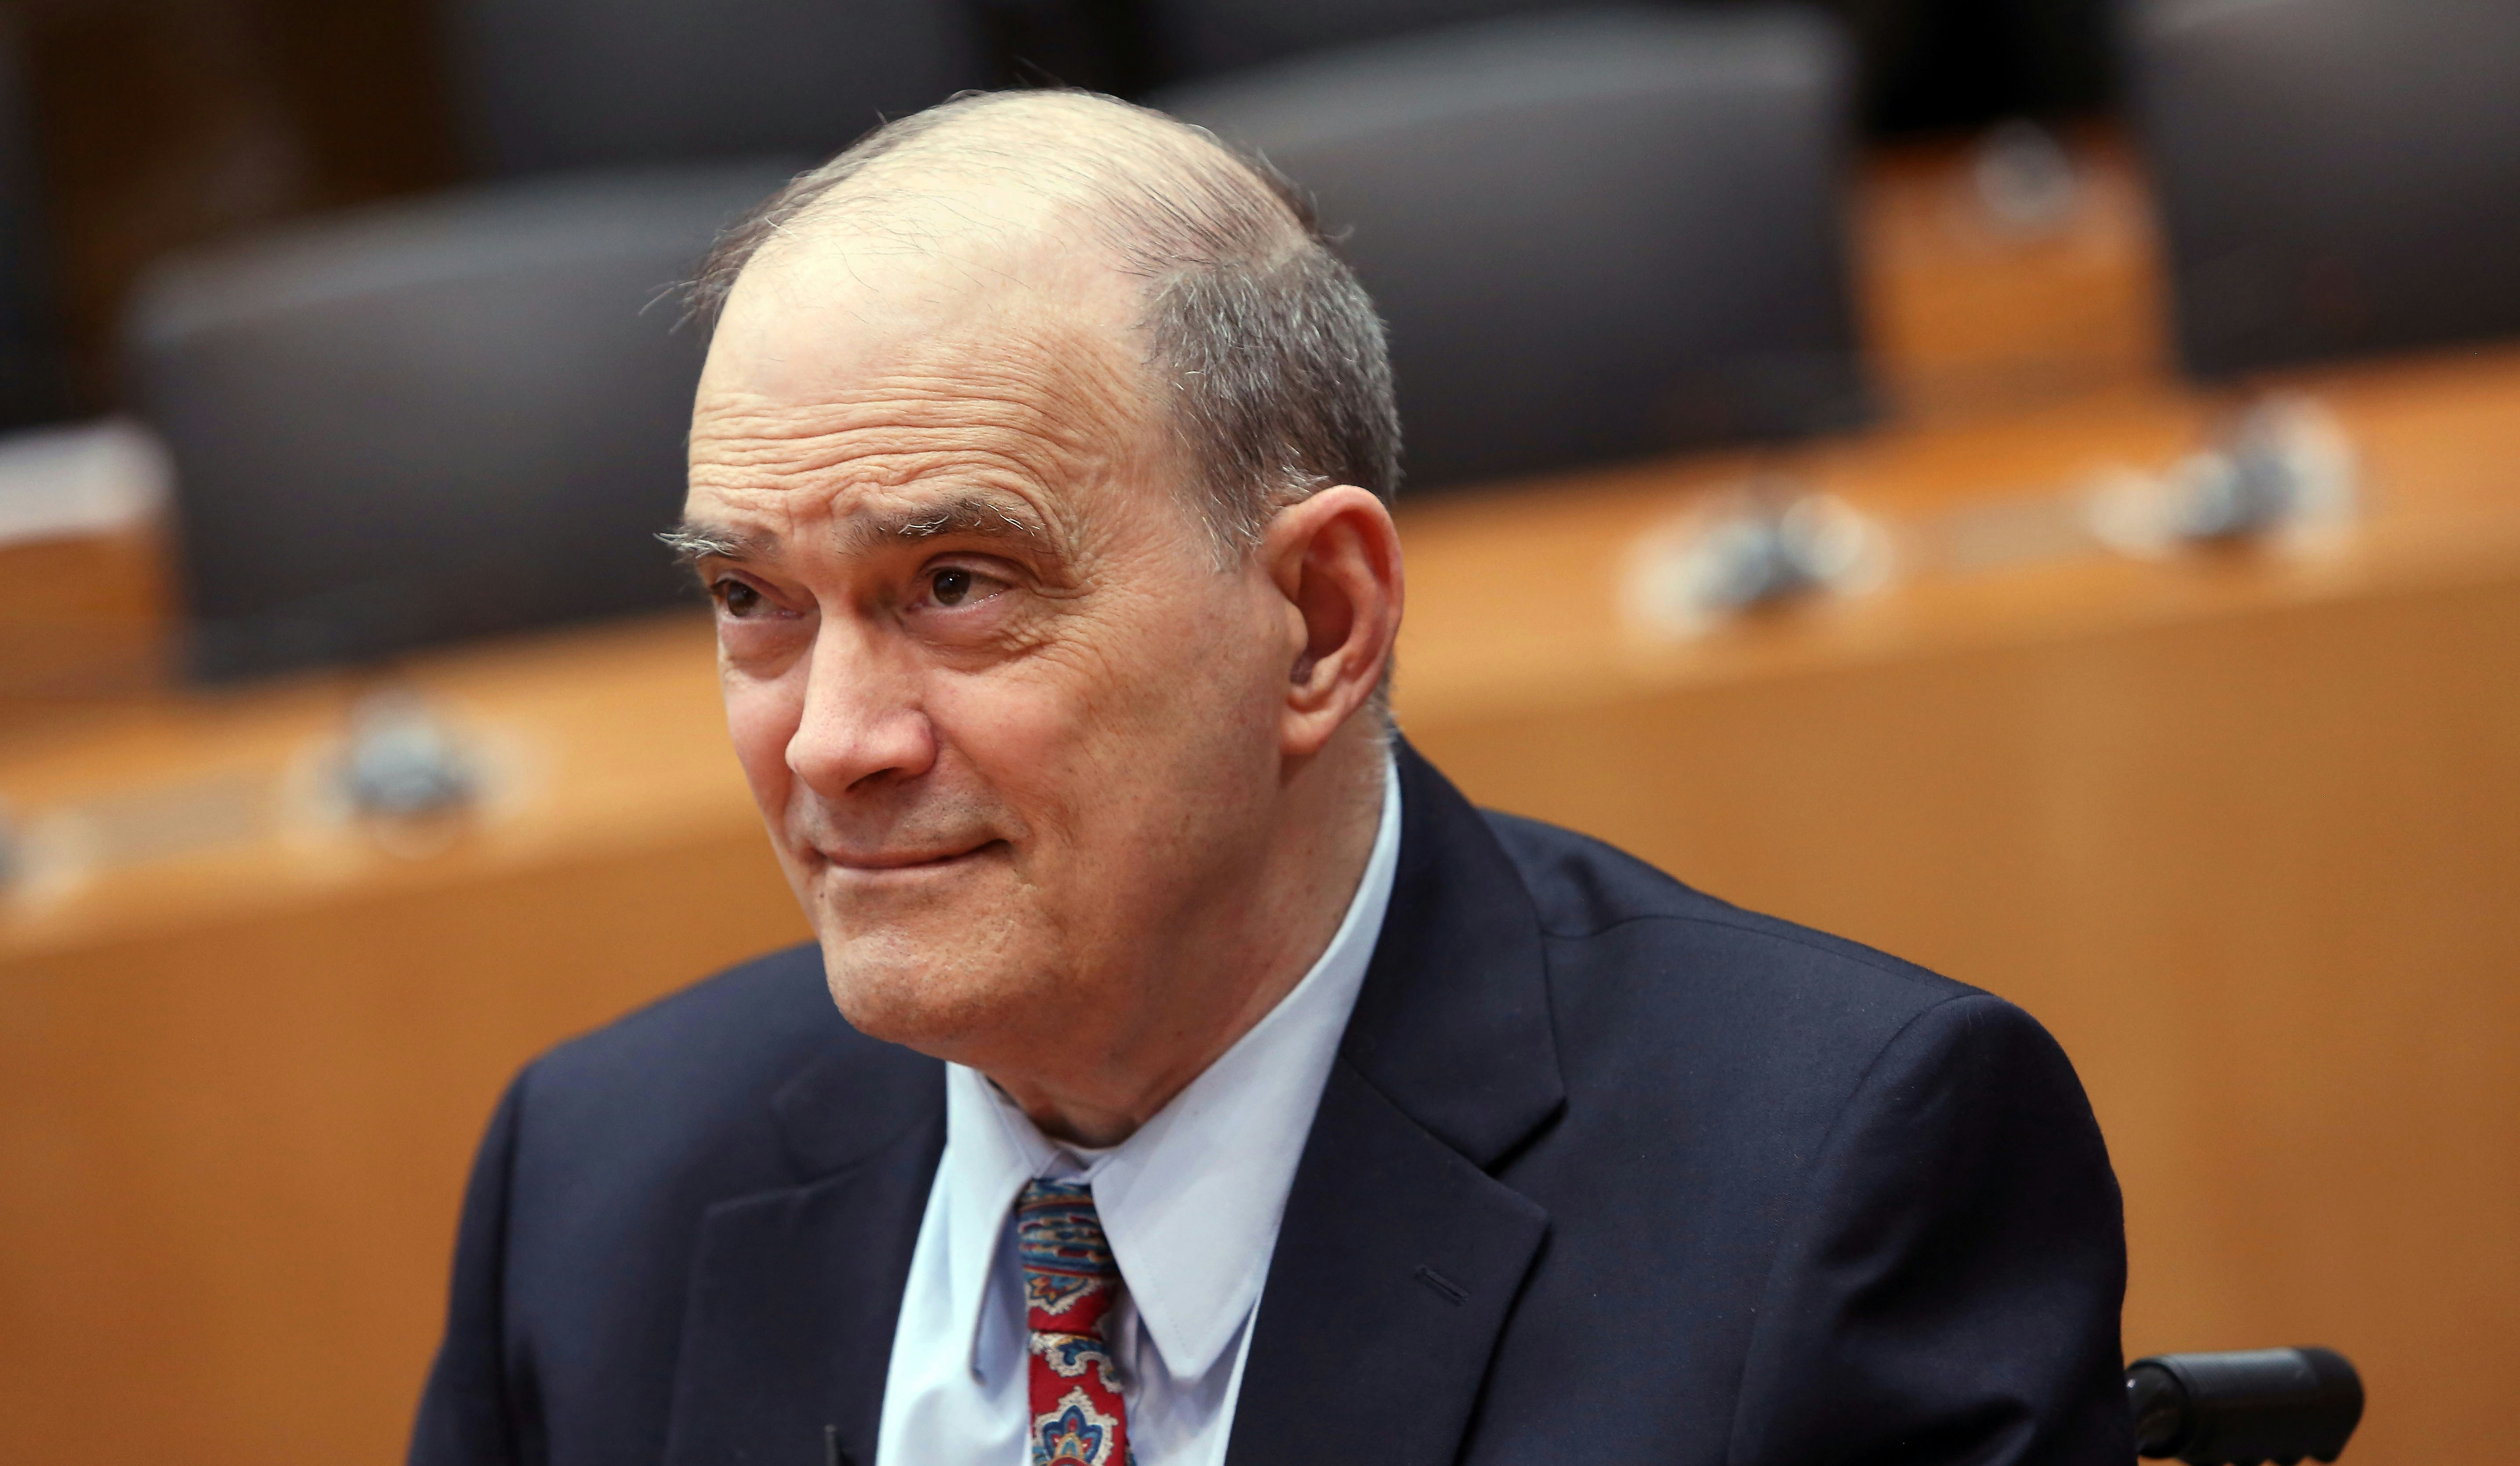 BERLIN, GERMANY - JULY 03:  William Binney, former intelligence official of the U.S. National Security Agency (NSA) turned whistleblower, arrives to testify at the Bundestag commission investigating the role of the U.S. National Security Agency (NSA) in Germany on July 3, 2014 in Berlin, Germany. The commission convened following revelations last year that the NSA had for years eavesdropped on the mobile phone of German Chancellor Angela Merkel and other leading German and European politicians. Recent documents released by former NSA employee Edward Snowden show strong activity by the NSA in Germany as well as cooperation between the NSA and the German intelligence service.  (Photo by Adam Berry/Getty Images)